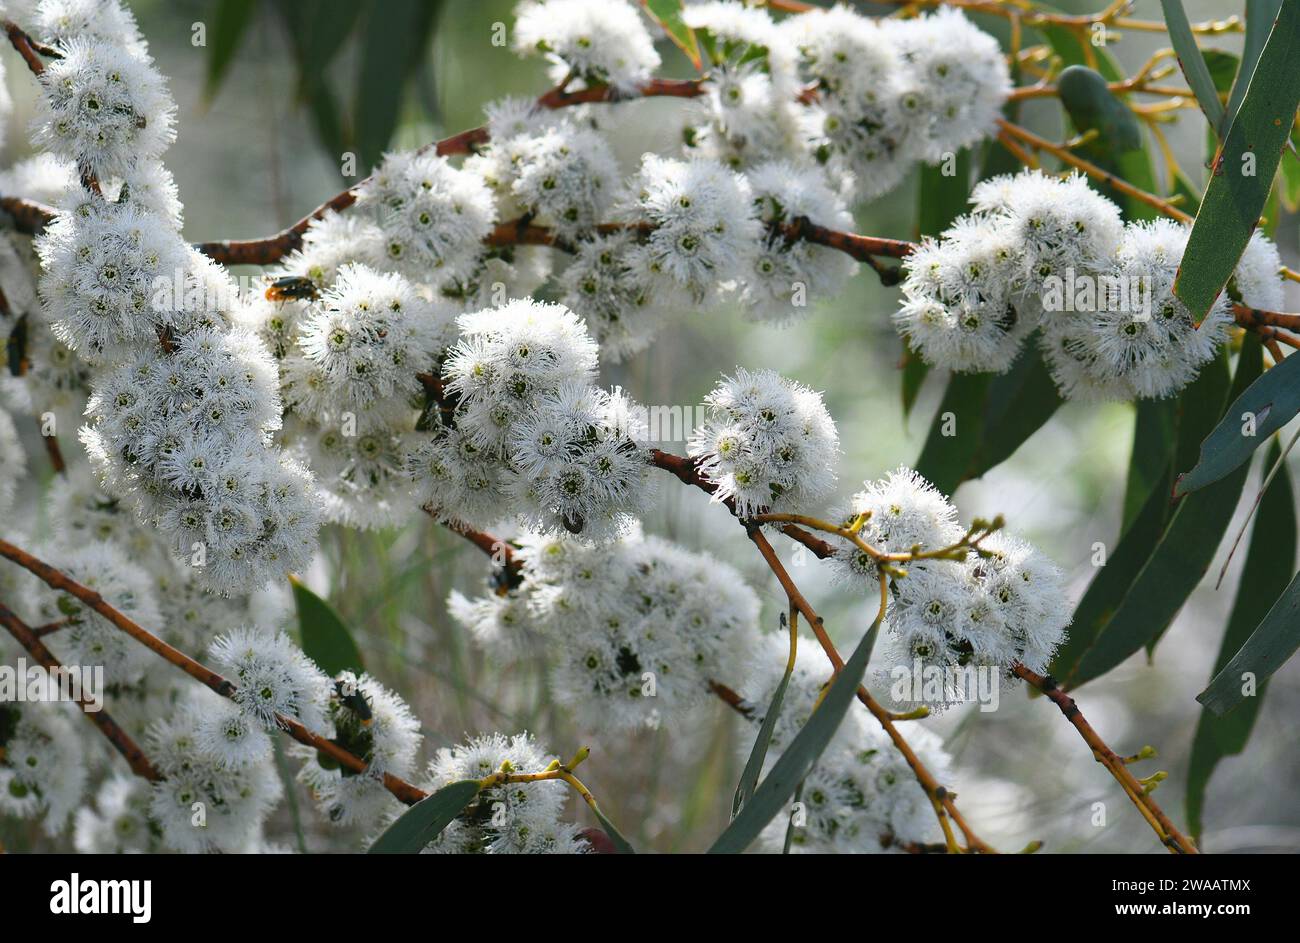 White blossoms of Australian native Snow Gum, Eucalyptus pauciflora, family Myrtaceae, growing in Snowy mountains region, NSW. Spring summer flowering Stock Photo